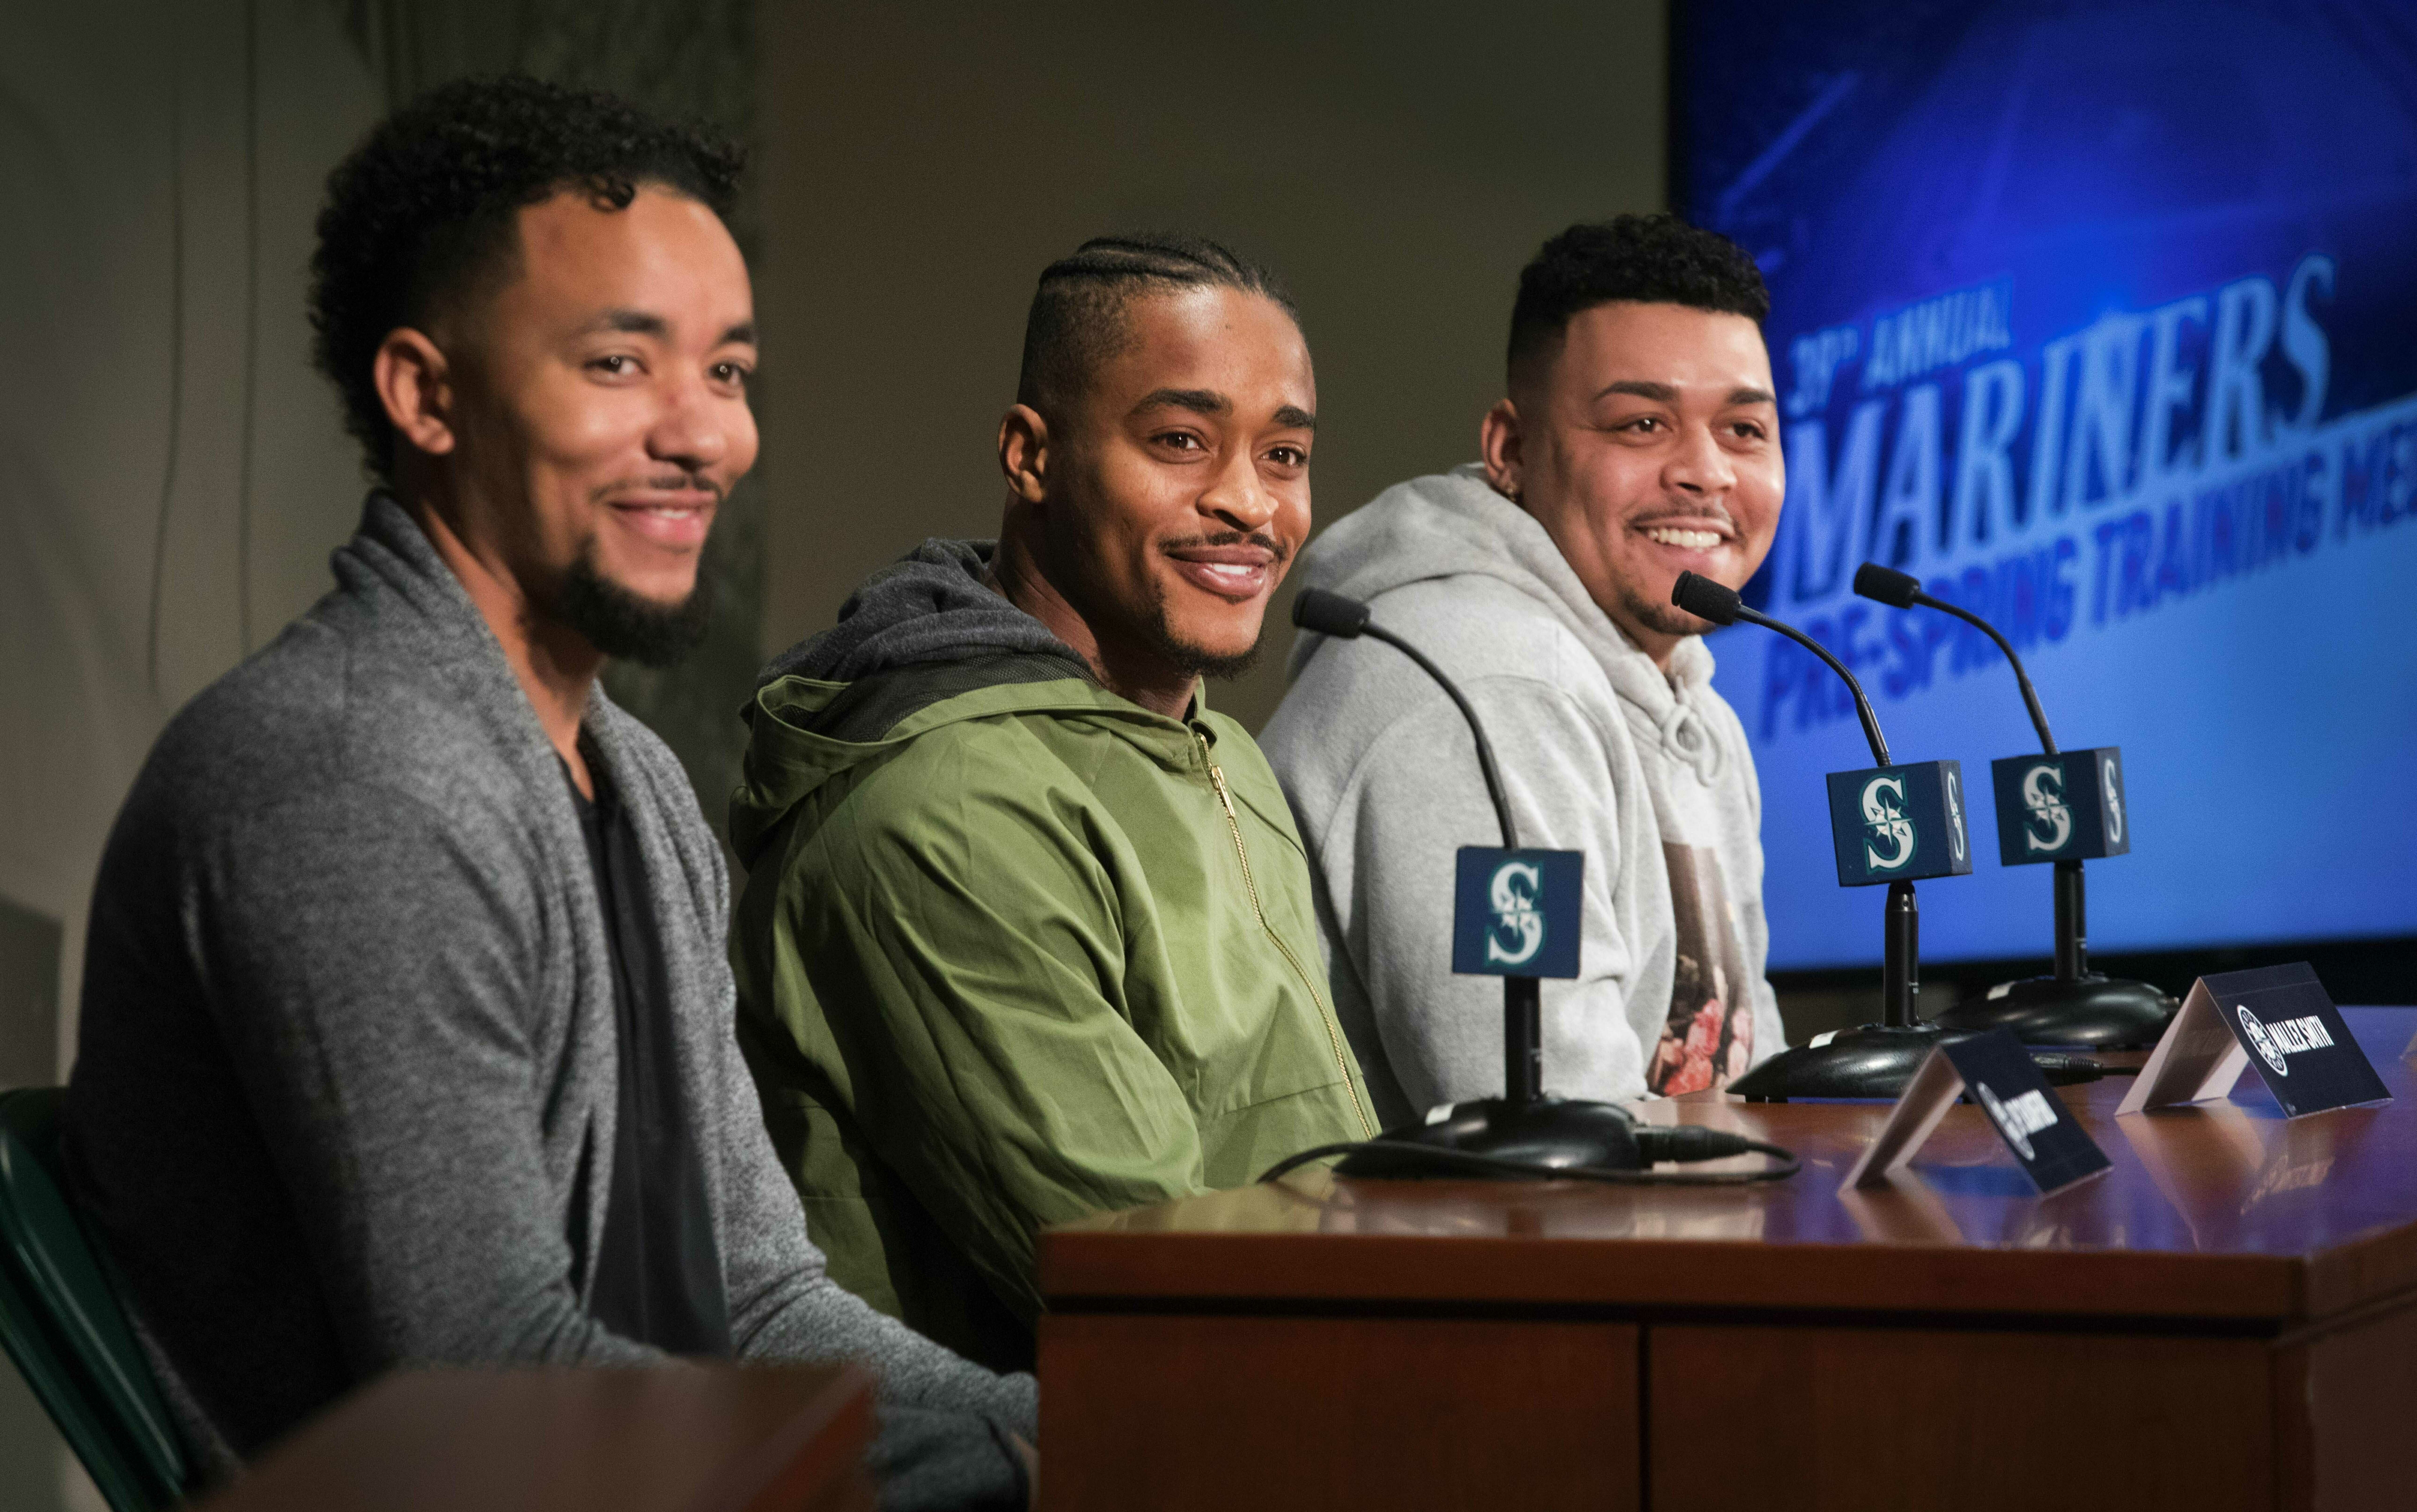 New Seattle Mariners players; from left, infielder JP Crawford, outfielder Mallex Smith and pitcher Justus Sheffield meet the media during the annual pre-spring training media event, Thursday, Jan. 24, 2019 in Seattle.